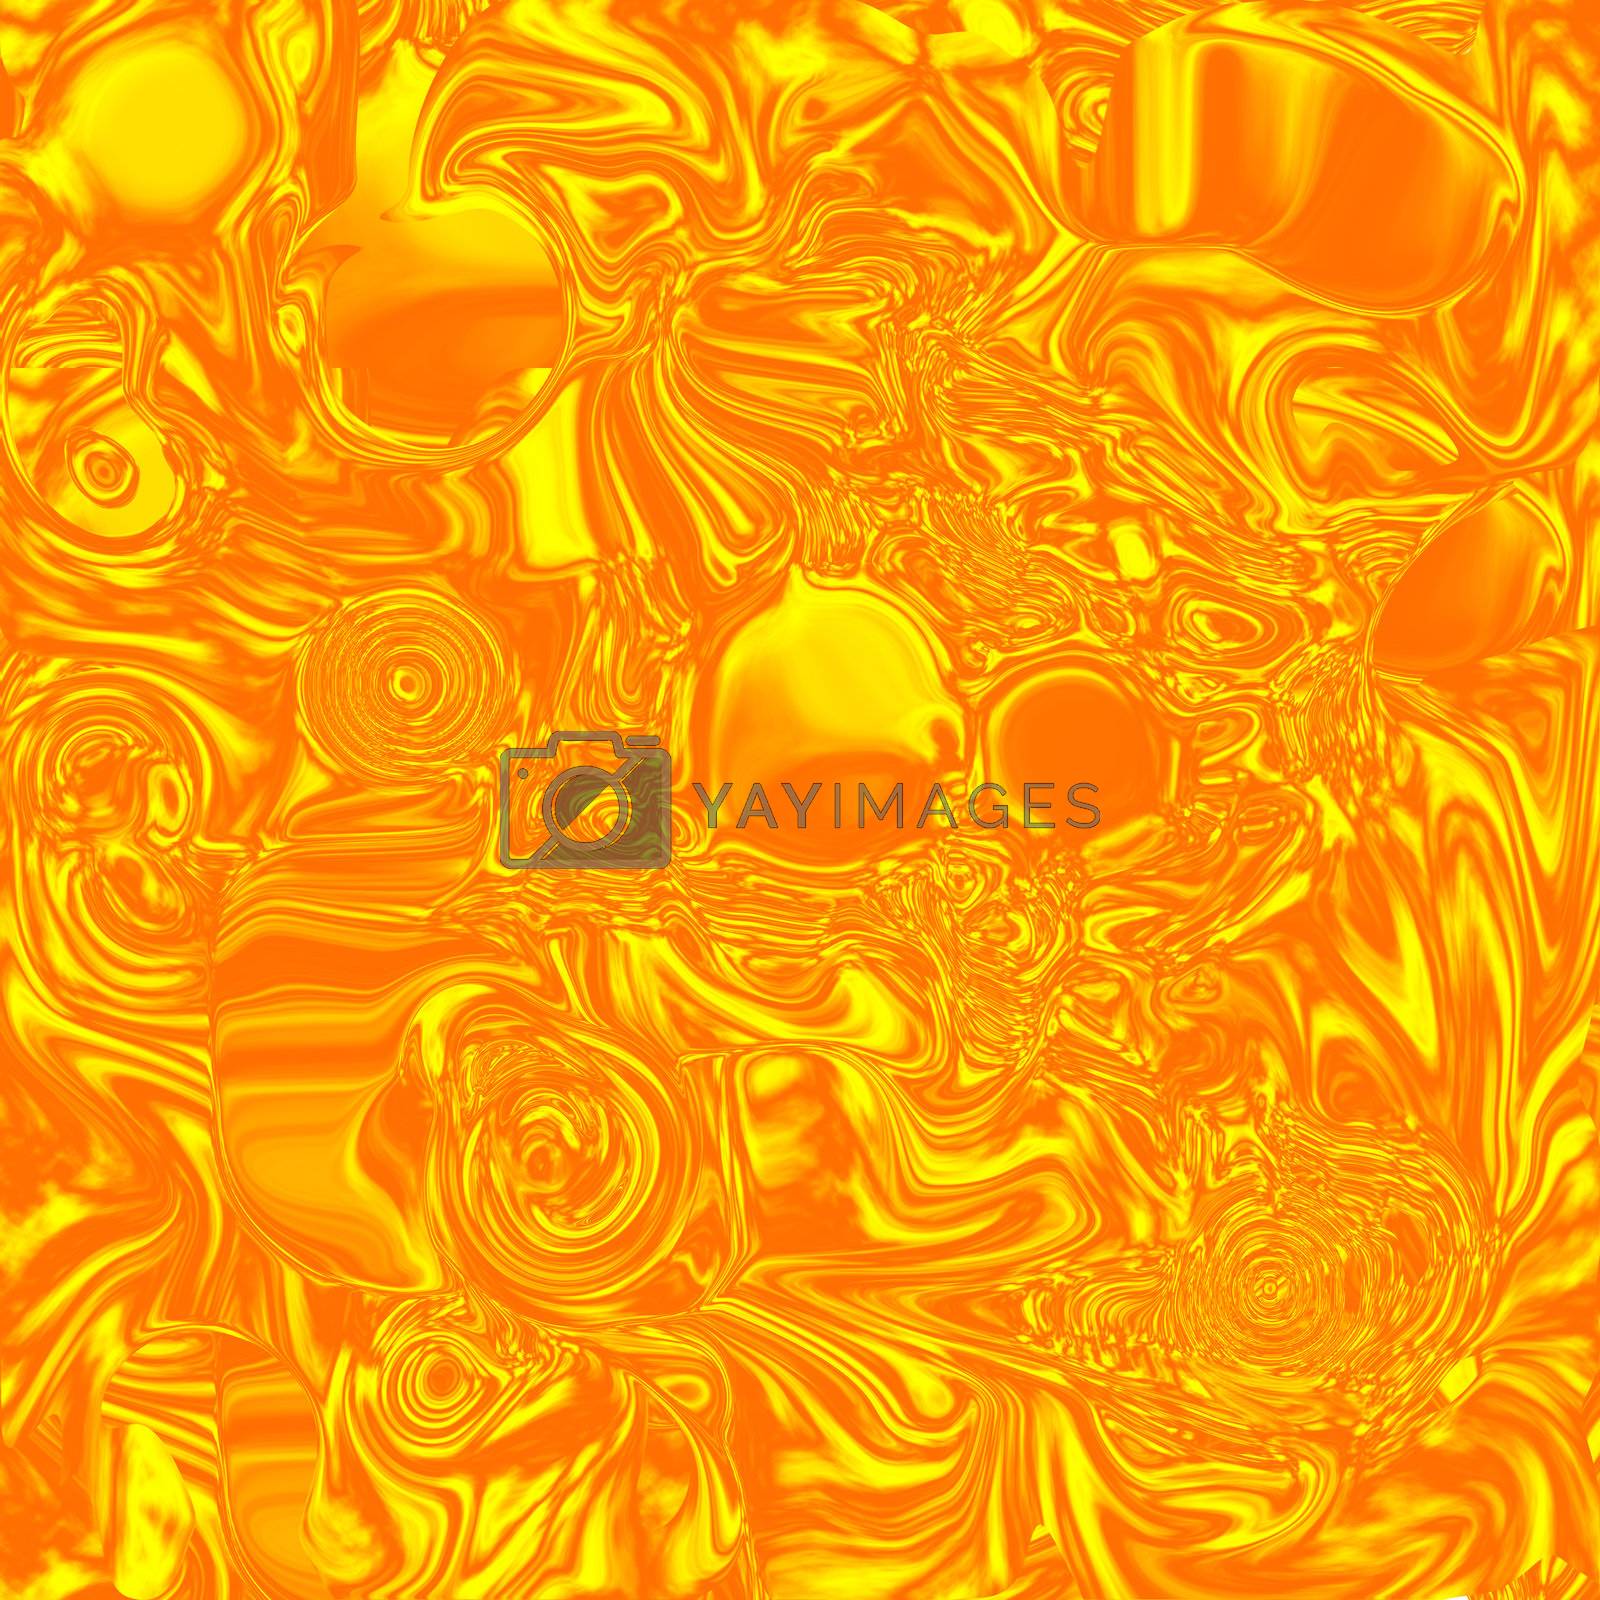 Royalty free image of gold texture by 578foot